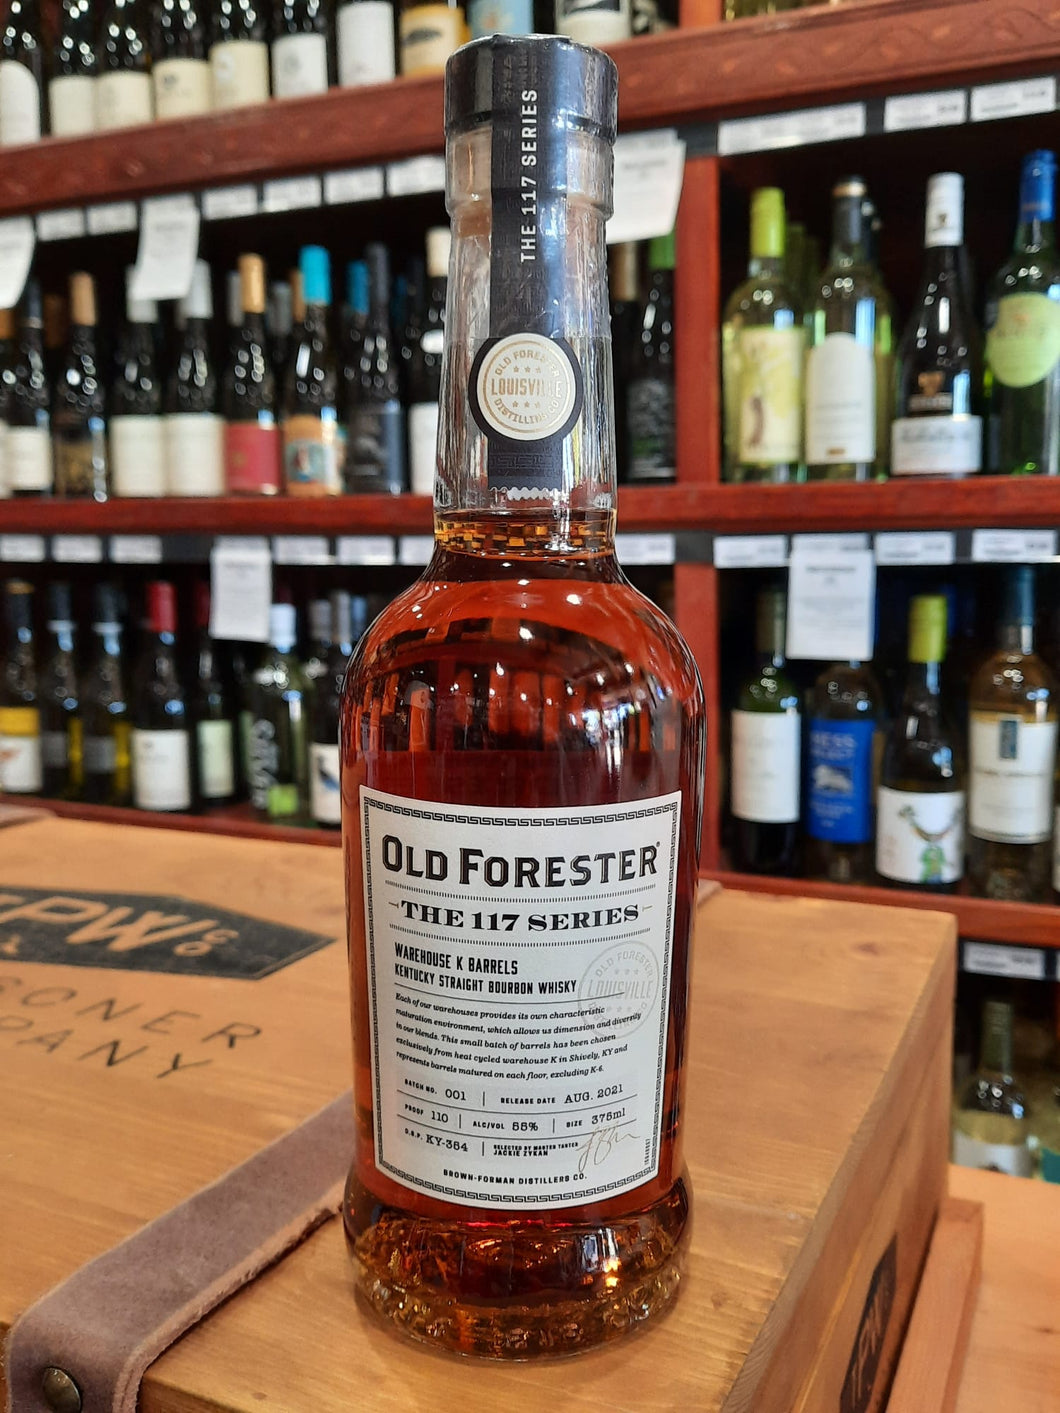 Old Forester The 117 Series Warehouse K Barrels Kentucky Straight Bourbon Whisky 375ml